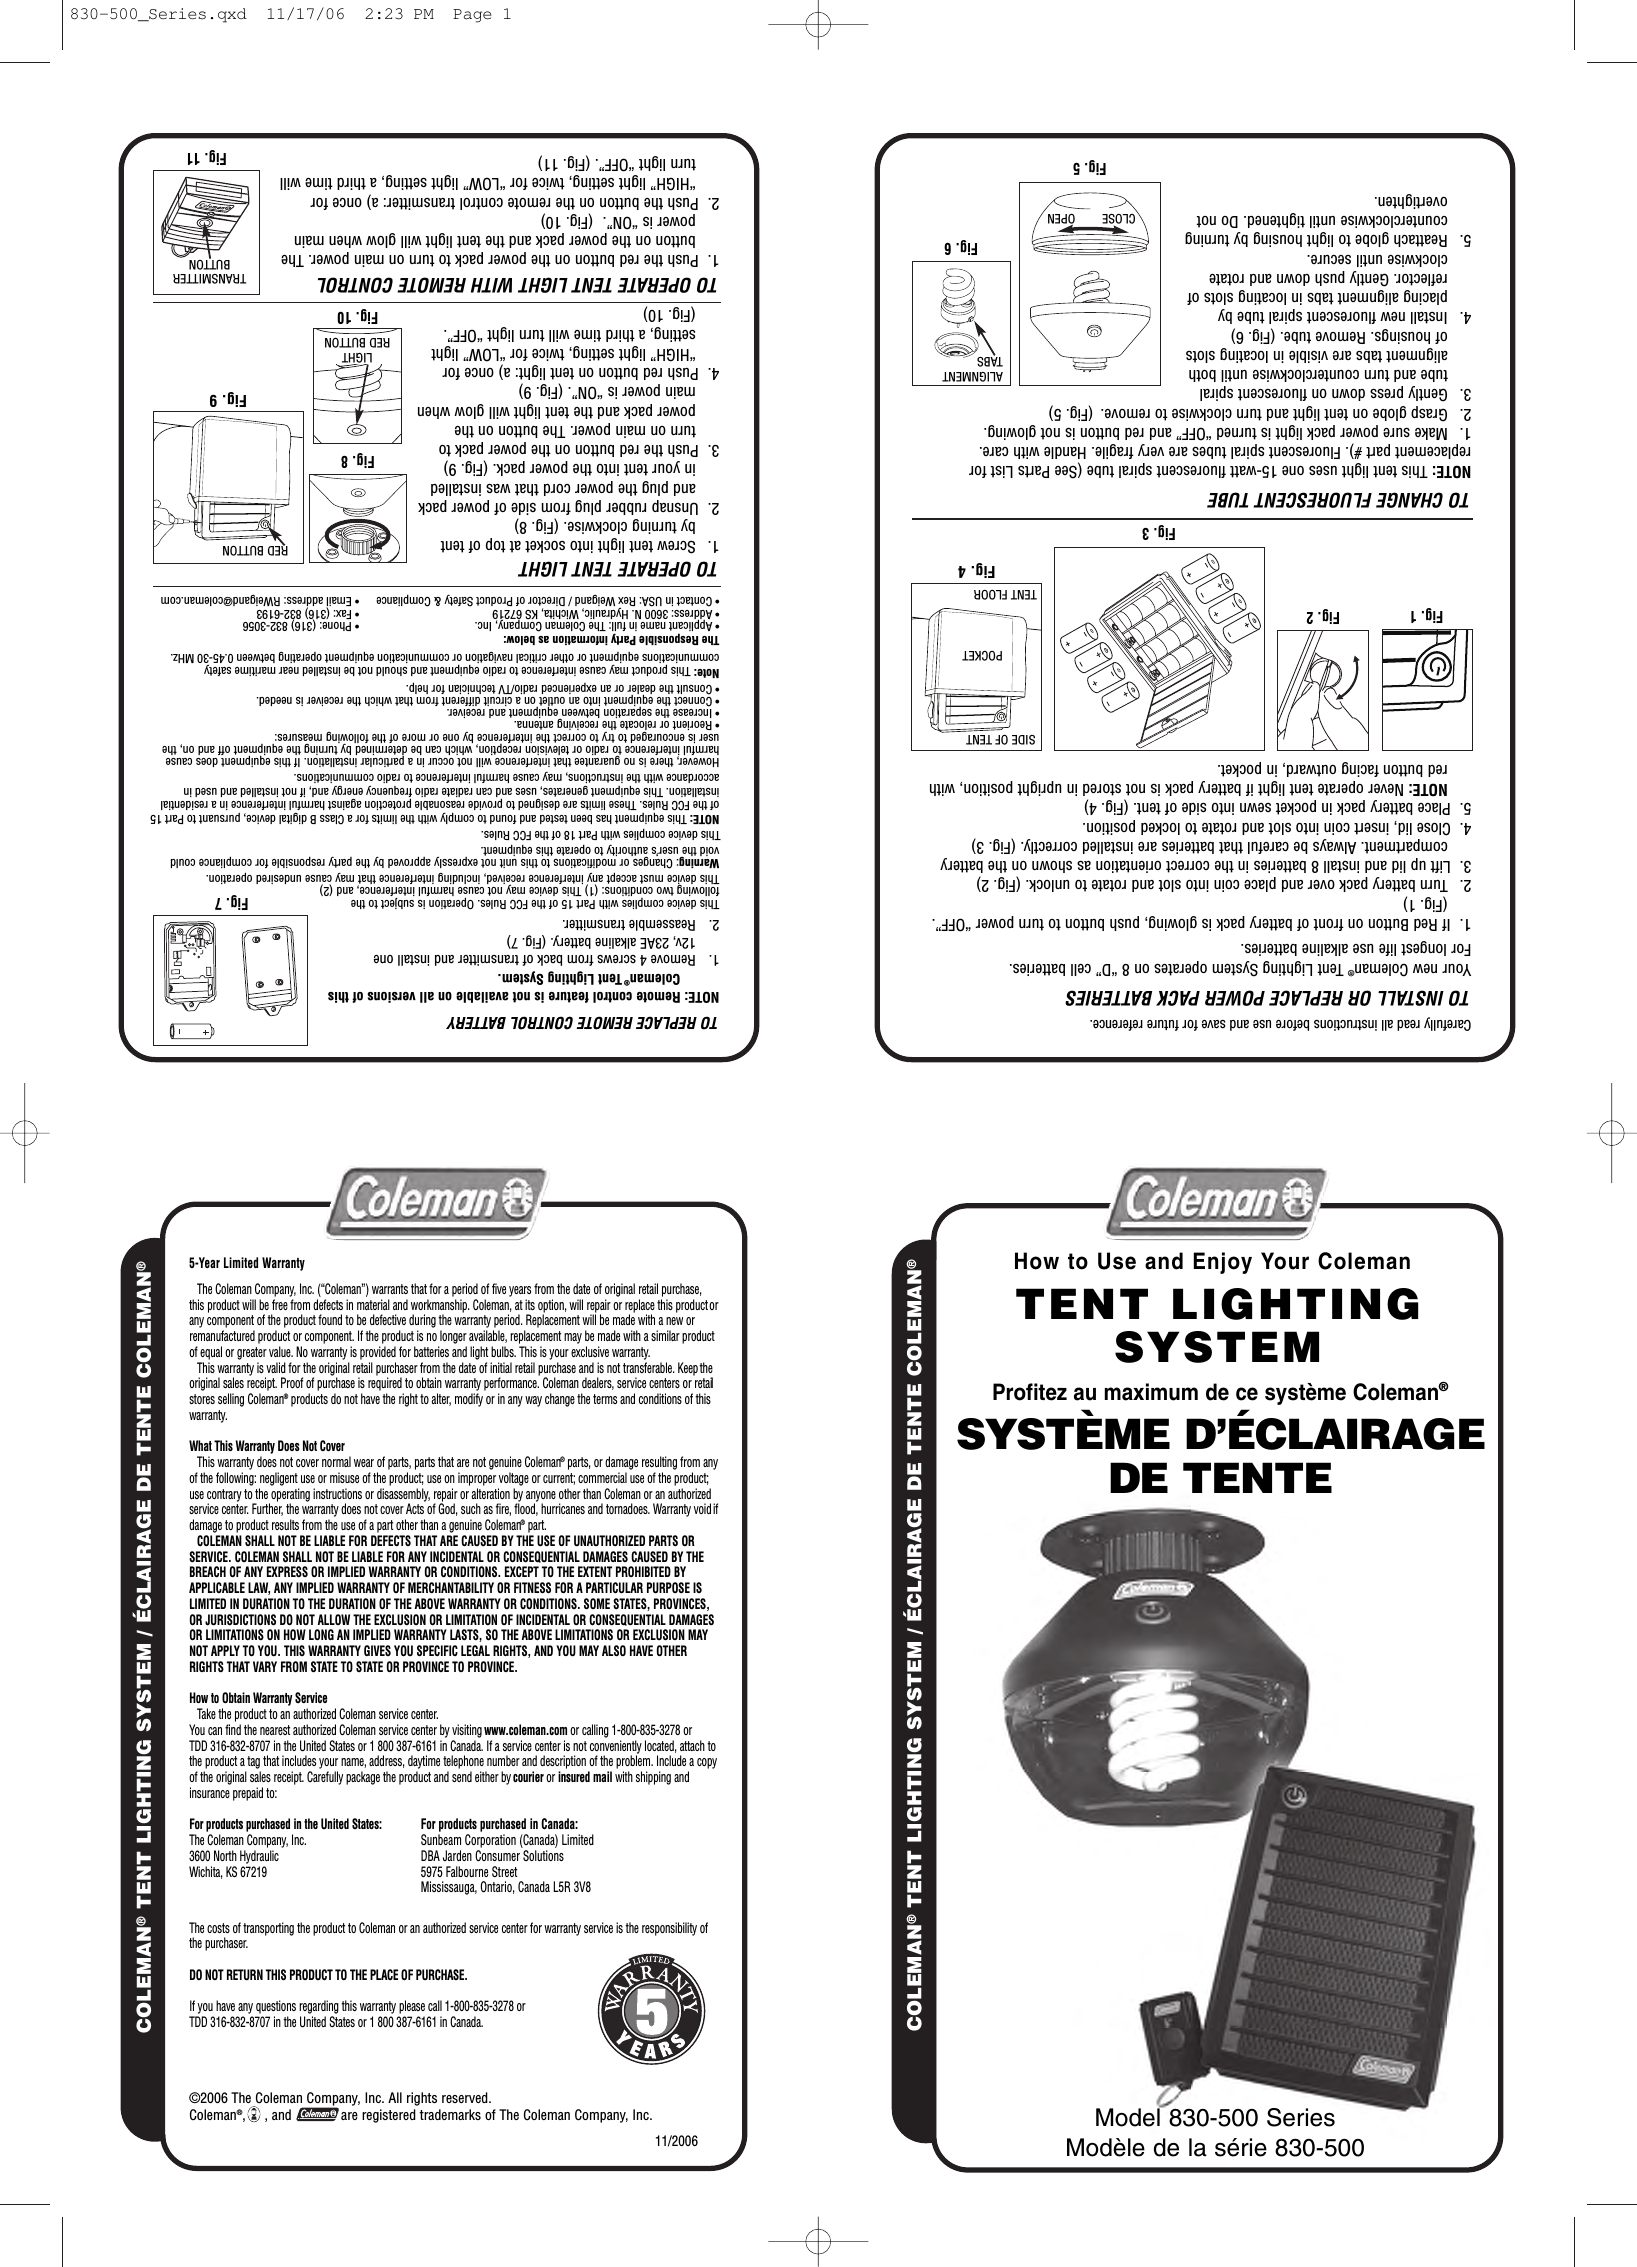 Carefully read all instructions before use and save for future reference.TO INSTALL OR REPLACE POWER PACK BATTERIESYour new Coleman®Tent Lighting System operates on 8 “D” cell batteries.For longest life use alkaline batteries.1.  If Red Button on front of battery pack is glowing, push button to turn power “OFF”. (Fig. 1)2. Turn battery pack over and place coin into slot and rotate to unlock. (Fig. 2)3.  Lift up lid and install 8 batteries in the correct orientation as shown on the battery compartment. Always be careful that batteries are installed correctly. (Fig. 3)4.  Close lid, insert coin into slot and rotate to locked position.5.  Place battery pack in pocket sewn into side of tent. (Fig. 4)NOTE: Never operate tent light if battery pack is not stored in upright position, with red button facing outward, in pocket.TO REPLACE REMOTE CONTROL BATTERYNOTE: Remote control feature is not available on all versions of this Coleman®Tent Lighting System.1.   Remove 4 screws from back of transmitter and install one12v, 23AE alkaline battery. (Fig. 7)2. Reassemble transmitter.This device complies with Part 15 of the FCC Rules. Operation is subject to thefollowing two conditions: (1) This device may not cause harmful interference, and (2)This device must accept any interference received, including interference that may cause undesired operation.Warning: Changes or modifications to this unit not expressly approved by the party responsible for compliance couldvoid the user’s authority to operate this equipment.This device complies with Part 18 of the FCC Rules.Note: This product may cause interference to radio equipment and should not be installed near maritime safety NOTE: This equipment has been tested and found to comply with the limits for a Class B digital device, pursuant to Part 15 of the FCC Rules. These limits are designed to provide reasonable protection against harmful interference in a residential installation. This equipment generates, uses and can radiate radio frequency energy and, if not installed and used in accordance with the instructions, may cause harmful interference to radio communications.communications equipment or other critical navigation or communication equipment operating between 0.45-30 MHz.However, there is no guarantee that interference will not occur in a particular installation. If this equipment does causeharmful interference to radio or television reception, which can be determined by turning the equipment off and on, theuser is encouraged to try to correct the interference by one or more of the following measures:• Reorient or relocate the receiving antenna.• Increase the separation between equipment and receiver.The Responsible Party information as below:• Applicant name in full: The Coleman Company, Inc.• Address: 3600 N. Hydraulic, Wichita, KS 67219• Contact in USA: Rex Weigand / Director of Product Safety &amp; Compliance• Phone: (316) 832-3056• Fax: (316) 832-6193• Email address: RWeigand@coleman.com• Connect the equipment into an outlet on a circuit different from that which the receiver is needed.• Consult the dealer or an experienced radio/TV technician for help.NAMELOC ®NAMELOC ETNET ED EGARIALCÉ / METSYS GNITHGIL TNET®Model 830-500 SeriesModèle de la série 830-50011/2006For products purchased in Canada:Sunbeam Corporation (Canada) LimitedDBA Jarden Consumer Solutions5975 Falbourne StreetMississauga, Ontario, Canada L5R 3V85-Year Limited WarrantyThe Coleman Company, Inc. (“Coleman”) warrants that for a period of five years from the date of original retail purchase,this product will be free from defects in material and workmanship. Coleman, at its option, will repair or replace this product orany component of the product found to be defective during the warranty period. Replacement will be made with a new orremanufactured product or component. If the product is no longer available, replacement may be made with a similar productof equal or greater value. No warranty is provided for batteries and light bulbs. This is your exclusive warranty.This warranty is valid for the original retail purchaser from the date of initial retail purchase and is not transferable. Keep theoriginal sales receipt. Proof of purchase is required to obtain warranty performance. Coleman dealers, service centers or retailstores selling Coleman®products do not have the right to alter, modify or in any way change the terms and conditions of thiswarranty.What This Warranty Does Not CoverThis warranty does not cover normal wear of parts, parts that are not genuine Coleman®parts, or damage resulting from anyof the following: negligent use or misuse of the product; use on improper voltage or current; commercial use of the product;use contrary to the operating instructions or disassembly, repair or alteration by anyone other than Coleman or an authorizedservice center. Further, the warranty does not cover Acts of God, such as fire, flood, hurricanes and tornadoes. Warranty void ifdamage to product results from the use of a part other than a genuine Coleman®part.COLEMAN SHALL NOT BE LIABLE FOR DEFECTS THAT ARE CAUSED BY THE USE OF UNAUTHORIZED PARTS ORSERVICE. COLEMAN SHALL NOT BE LIABLE FOR ANY INCIDENTAL OR CONSEQUENTIAL DAMAGES CAUSED BY THEBREACH OF ANY EXPRESS OR IMPLIED WARRANTY OR CONDITIONS. EXCEPT TO THE EXTENT PROHIBITED BYAPPLICABLE LAW, ANY IMPLIED WARRANTY OF MERCHANTABILITY OR FITNESS FOR A PARTICULAR PURPOSE ISLIMITED IN DURATION TO THE DURATION OF THE ABOVE WARRANTY OR CONDITIONS. SOME STATES, PROVINCES,OR JURISDICTIONS DO NOT ALLOW THE EXCLUSION OR LIMITATION OF INCIDENTAL OR CONSEQUENTIAL DAMAGESOR LIMITATIONS ON HOW LONG AN IMPLIED WARRANTY LASTS, SO THE ABOVE LIMITATIONS OR EXCLUSION MAYNOT APPLY TO YOU. THIS WARRANTY GIVES YOU SPECIFIC LEGAL RIGHTS, AND YOU MAY ALSO HAVE OTHERRIGHTS THAT VARY FROM STATE TO STATE OR PROVINCE TO PROVINCE.How to Obtain Warranty ServiceTake the product to an authorized Coleman service center.You can find the nearest authorized Coleman service center by visiting www.coleman.com or calling 1-800-835-3278 orTDD 316-832-8707 in the United States or 1 800 387-6161 in Canada. If a service center is not conveniently located, attach tothe product a tag that includes your name, address, daytime telephone number and description of the problem. Include a copyof the original sales receipt. Carefully package the product and send either by courier or insured mail with shipping andinsurance prepaid to:For products purchased in the United States:The Coleman Company, Inc.3600 North HydraulicWichita, KS 67219The costs of transporting the product to Coleman or an authorized service center for warranty service is the responsibility ofthe purchaser.DO NOT RETURN THIS PRODUCT TO THE PLACE OF PURCHASE.If you have any questions regarding this warranty please call 1-800-835-3278 orTDD 316-832-8707 in the United States or 1 800 387-6161 in Canada.©2006 The Coleman Company, Inc. All rights reserved.Coleman®,     , and             are registered trademarks of The Coleman Company, Inc.NAMELOC®NAMELOC ETNET ED EGARIALCÉ / METSYS GNITHGIL TNET®Fig. 4TENT LIGHTINGSYSTEMHow to Use and Enjoy Your Coleman®Fig. 2Fig. 1Fig. 3TO CHANGE FLUORESCENT TUBENOTE: This tent light uses one 15-watt fluorescent spiral tube (See Parts List for replacement part #). Fluorescent spiral tubes are very fragile. Handle with care.1. Make sure power pack light is turned “OFF” and red button is not glowing.2. Grasp globe on tent light and turn clockwise to remove. (Fig. 5) 3. Gently press down on fluorescent spiraltube and turn counterclockwise until both alignment tabs are visible in locating slots of housings. Remove tube. (Fig. 6)4. Install new fluorescent spiral tube by placing alignment tabs in locating slots of reflector. Gently push down and rotate clockwise until secure.5. Reattach globe to light housing by turning counterclockwise until tightened. Do not overtighten.POCKETTENT FLOORSIDE OF TENTFig. 6Fig. 5Fig. 7TO OPERATE TENT LIGHT1. Screw tent light into socket at top of tentby turning clockwise. (Fig. 8)2.  Unsnap rubber plug from side of power packand plug the power cord that was installed in your tent into the power pack. (Fig. 9)3.  Push the red button on the power pack to turn on main power. The button on the power pack and the tent light will glow when main power is “ON”. (Fig. 9)4.  Push red button on tent light: a) once for  “HIGH” light setting, twice for “LOW” light setting, a third time will turn light “OFF”.(Fig. 10)TO OPERATE TENT LIGHT WITH REMOTE CONTROL1.  Push the red button on the power pack to turn on main power. The button on the power pack and the tent light will glow when main power is “ON”. (Fig. 10)2.  Push the button on the remote control transmitter: a) once for “HIGH” light setting, twice for “LOW” light setting, a third time will turn light “OFF”. (Fig. 11)Fig. 9RED BUTTONFig. 10LIGHTRED BUTTONFig. 11TRANSMITTERBUTTONSYSTÈME D’ÉCLAIRAGE DE TENTEProfitez au maximum de ce système Coleman®ALIGNMENTTABSCLOSE        OPEN830-500_Series.qxd  11/17/06  2:23 PM  Page 1Fig. 8